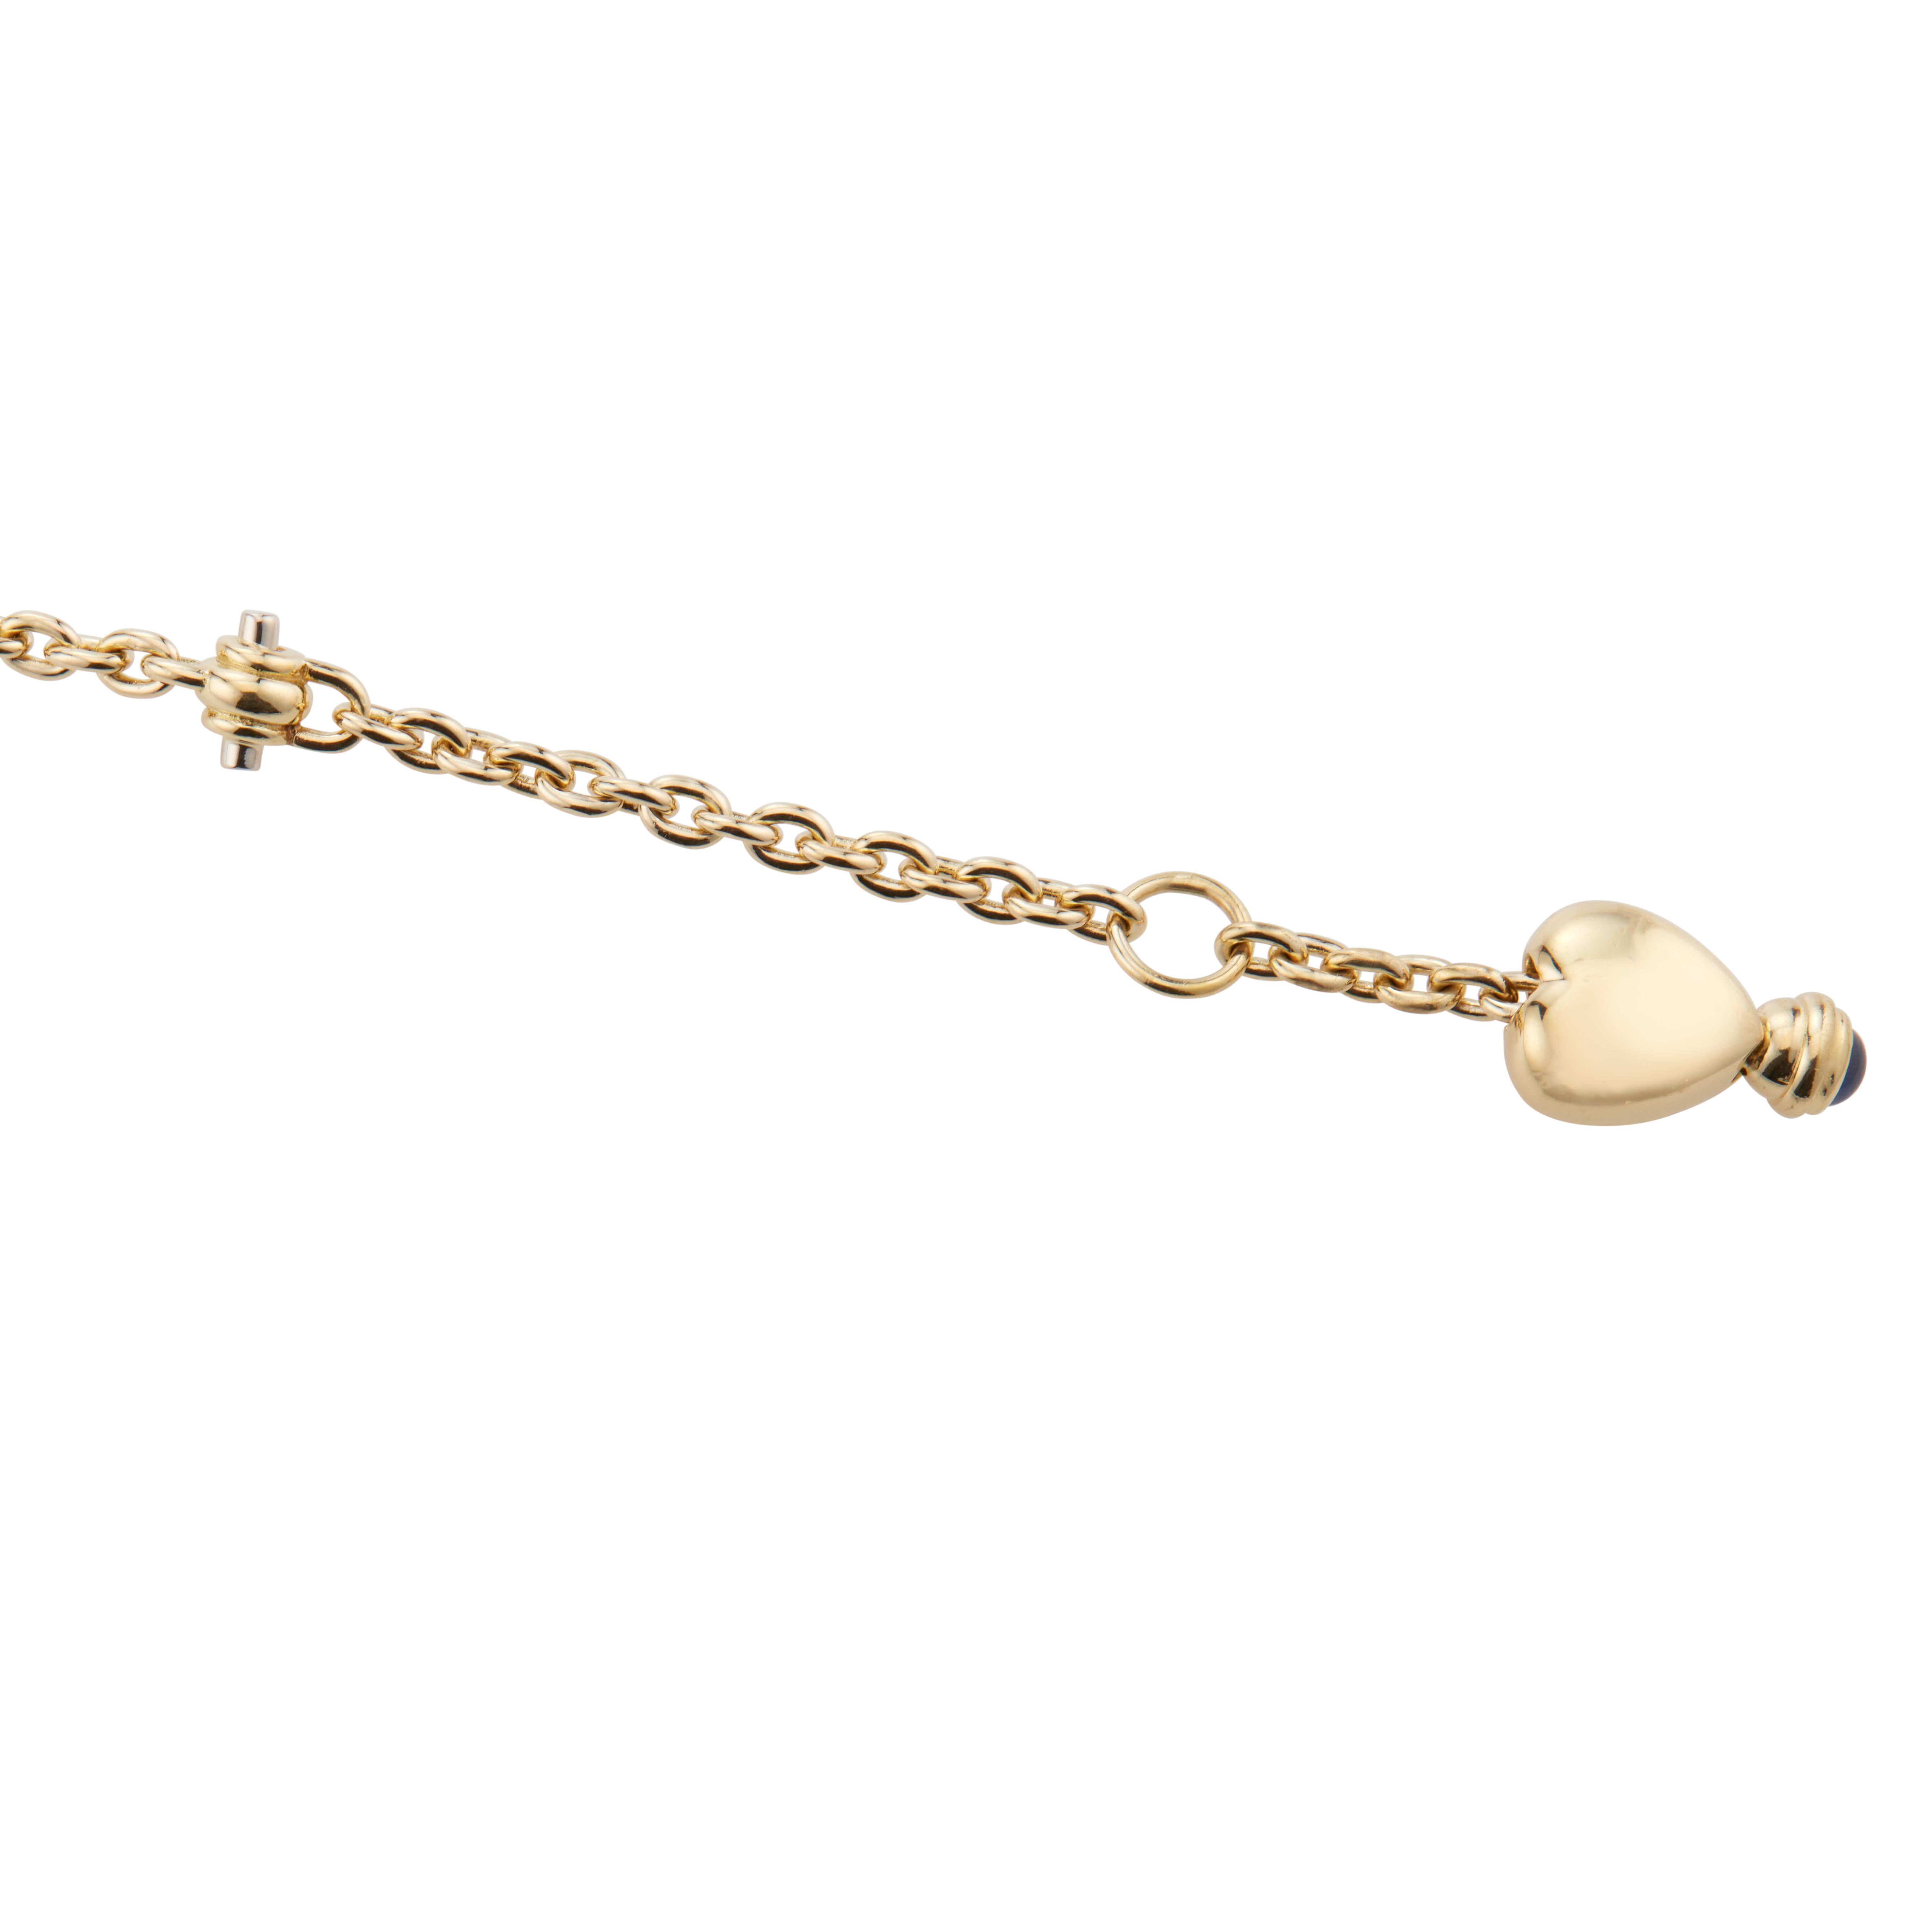 Sapphire heart link bracelet. 18k yellow gold link bracelet with a heart and cabochon drop dangle. 8.5 inches in length. 

1 blue cabochon sapphire, approx. .10cts
18k yellow gold
Stamped: 750
20.9 grams
Bracelet: 8 Inches
Total length: 8.5